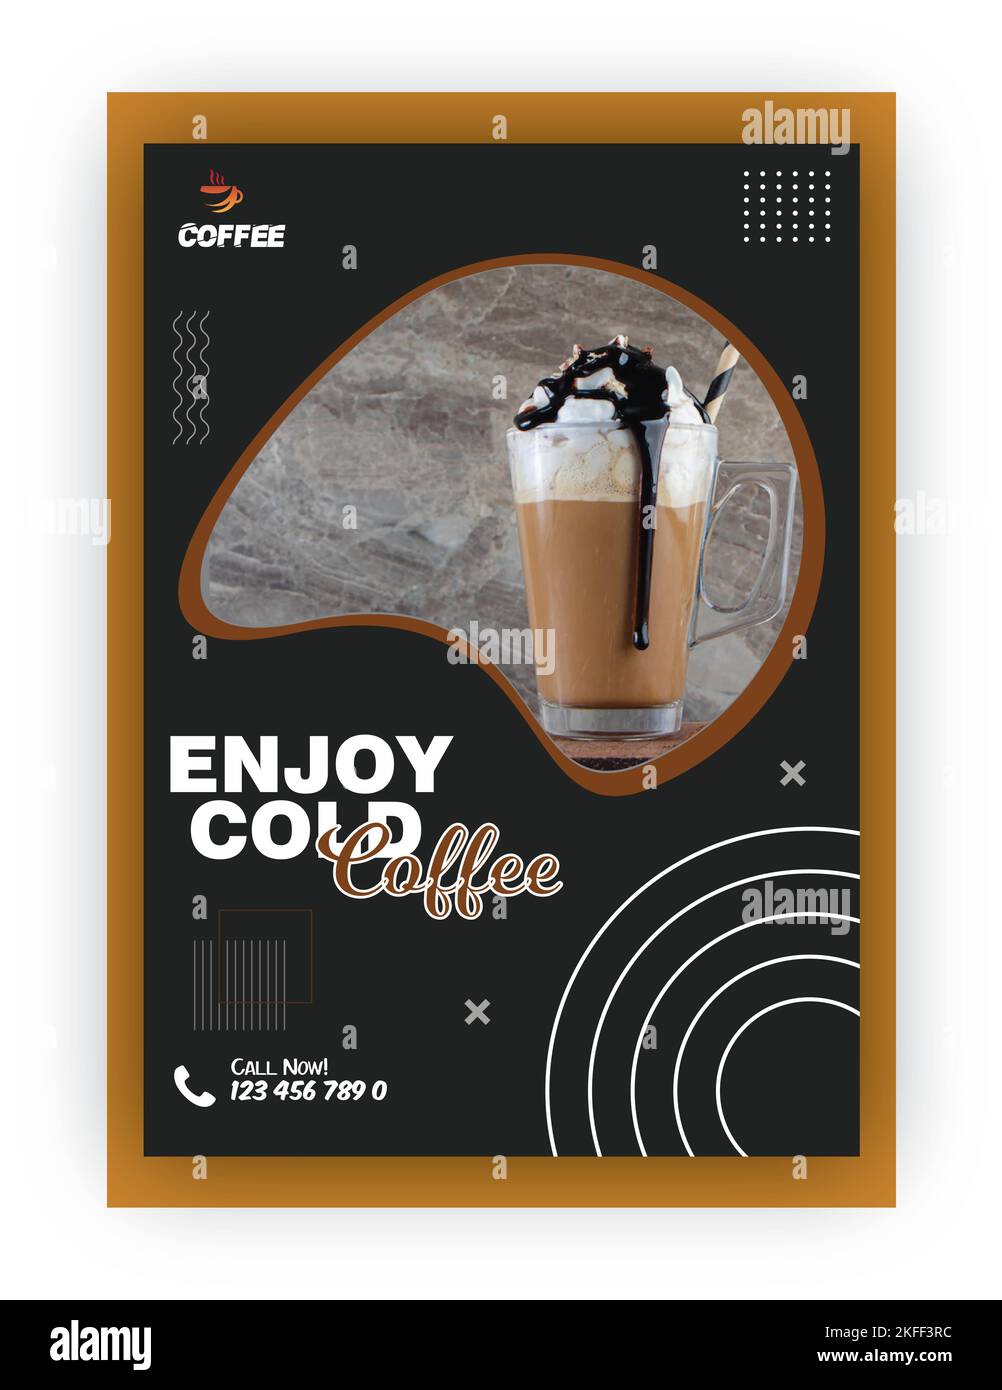 Business Corporate Flyer Editable Template For Coffee Cafes Stock Vector